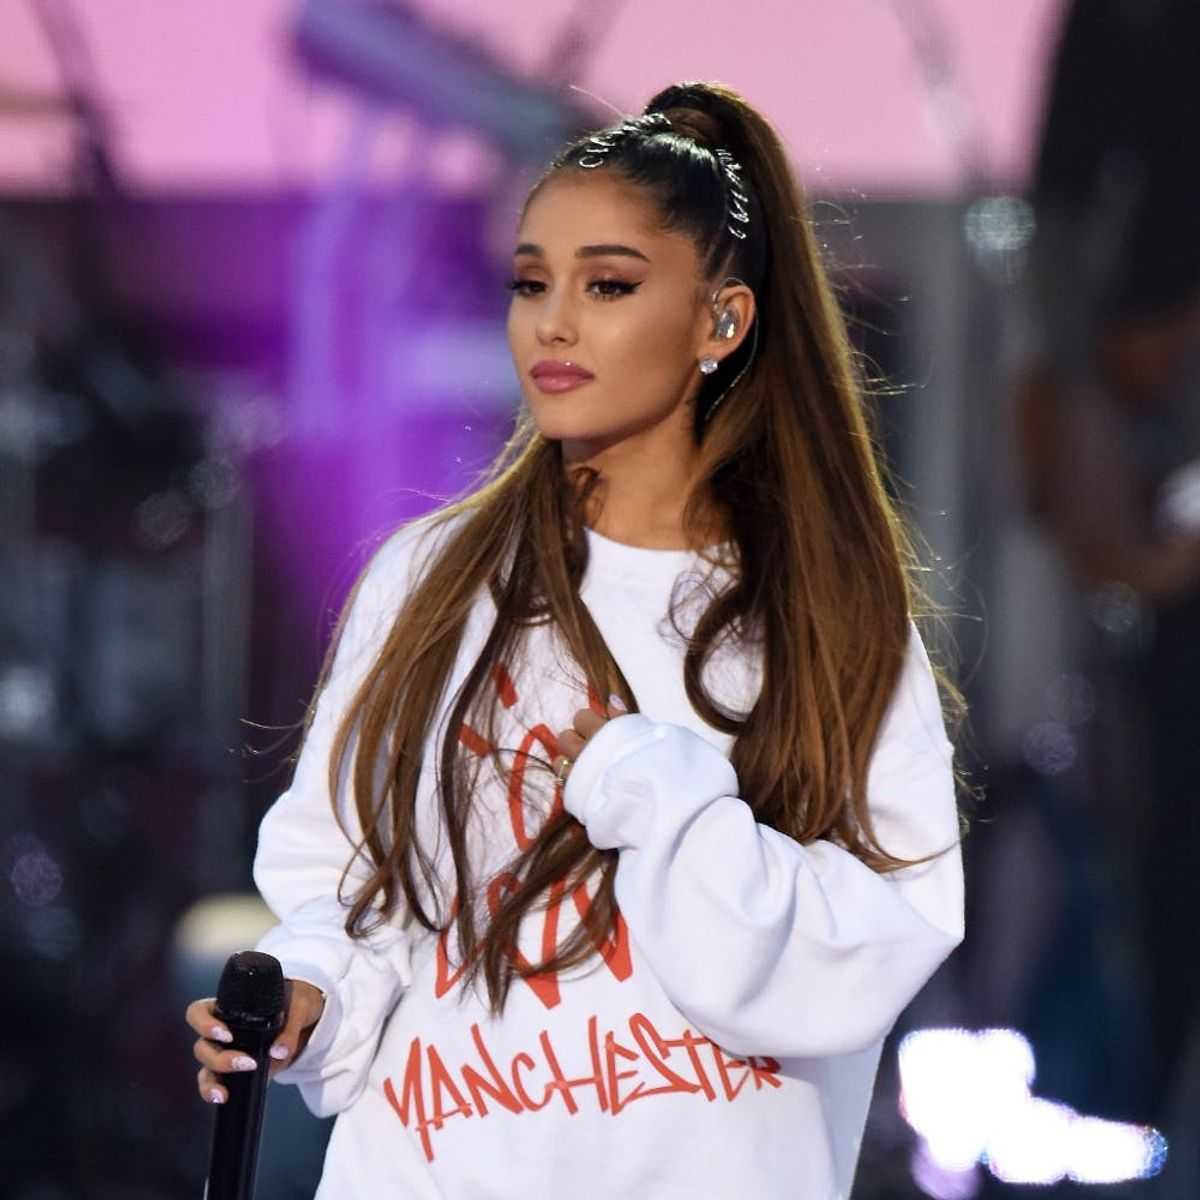 Ariana Grande’s New Tattoo Honors the Victims of the Manchester Terror Attack